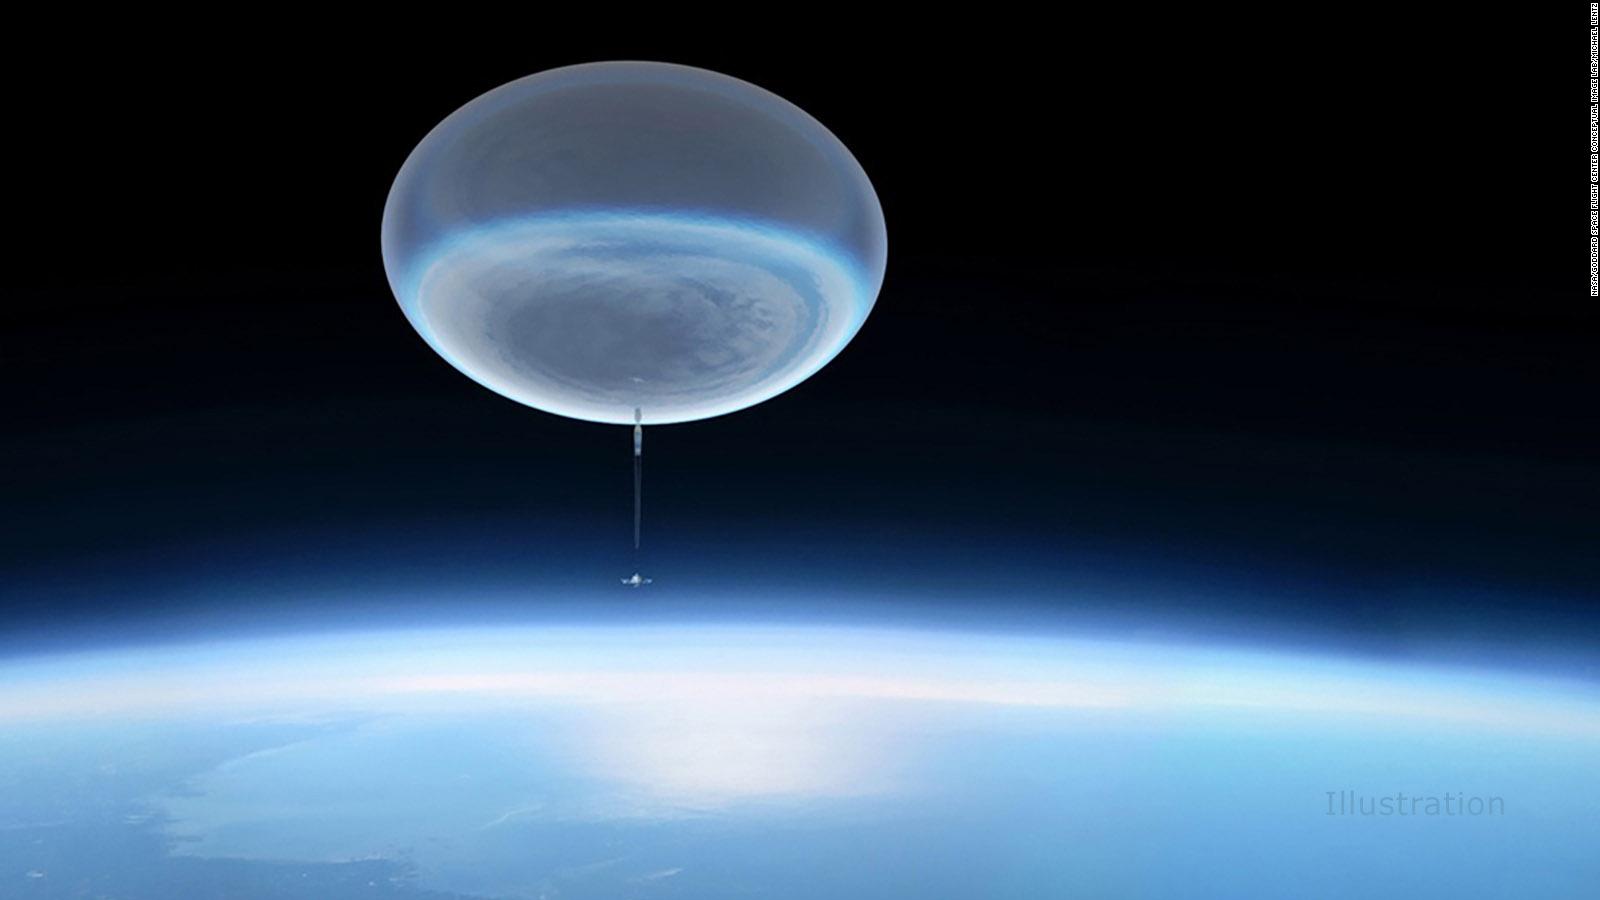 Asthros is NASA's new mission and consists of a balloon the size of a football stadium that will carry a telescope to the stratosphere.